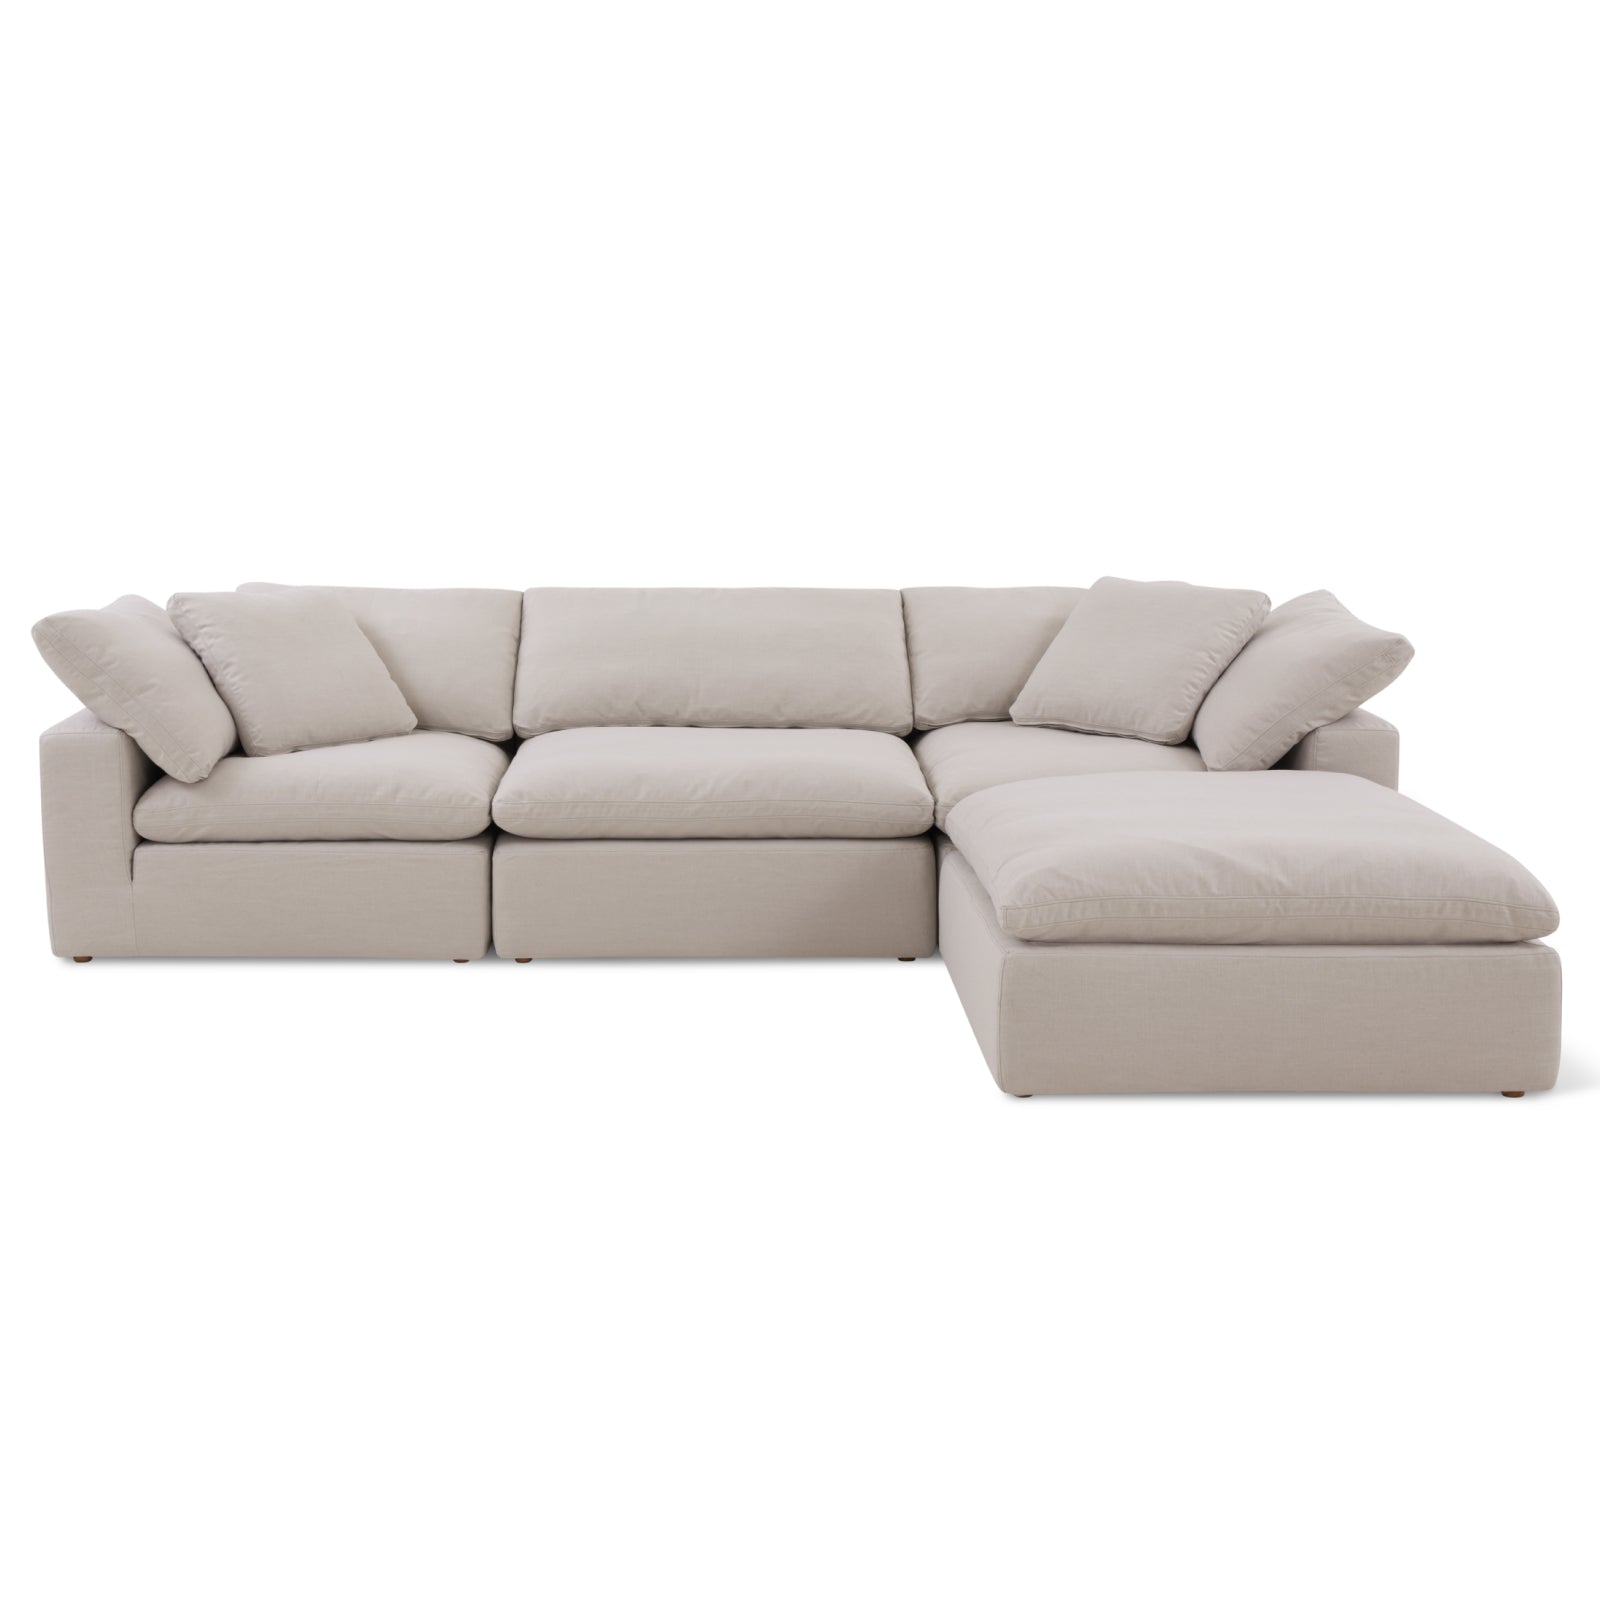 Movie Night™ 4-Piece Modular Sectional, Large, Clay - Image 12